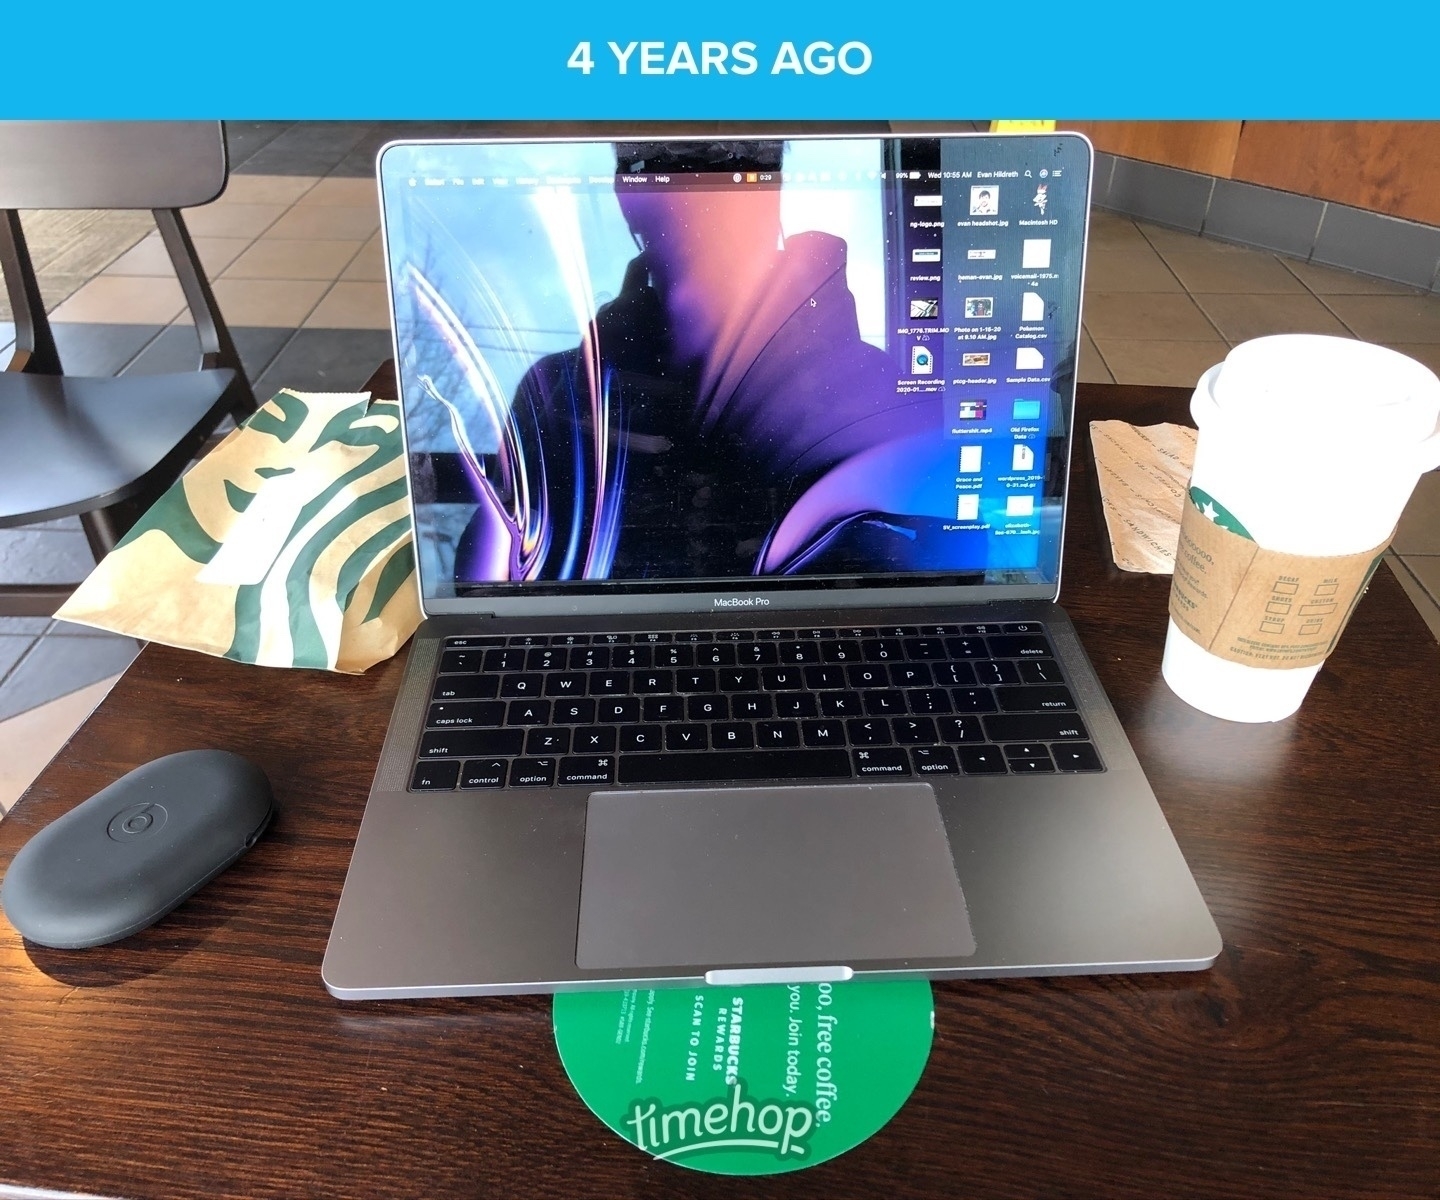 A picture of a laptop on a Starbucks table, a drink on one side and a pastry on the other. Captioned “4 years ago”